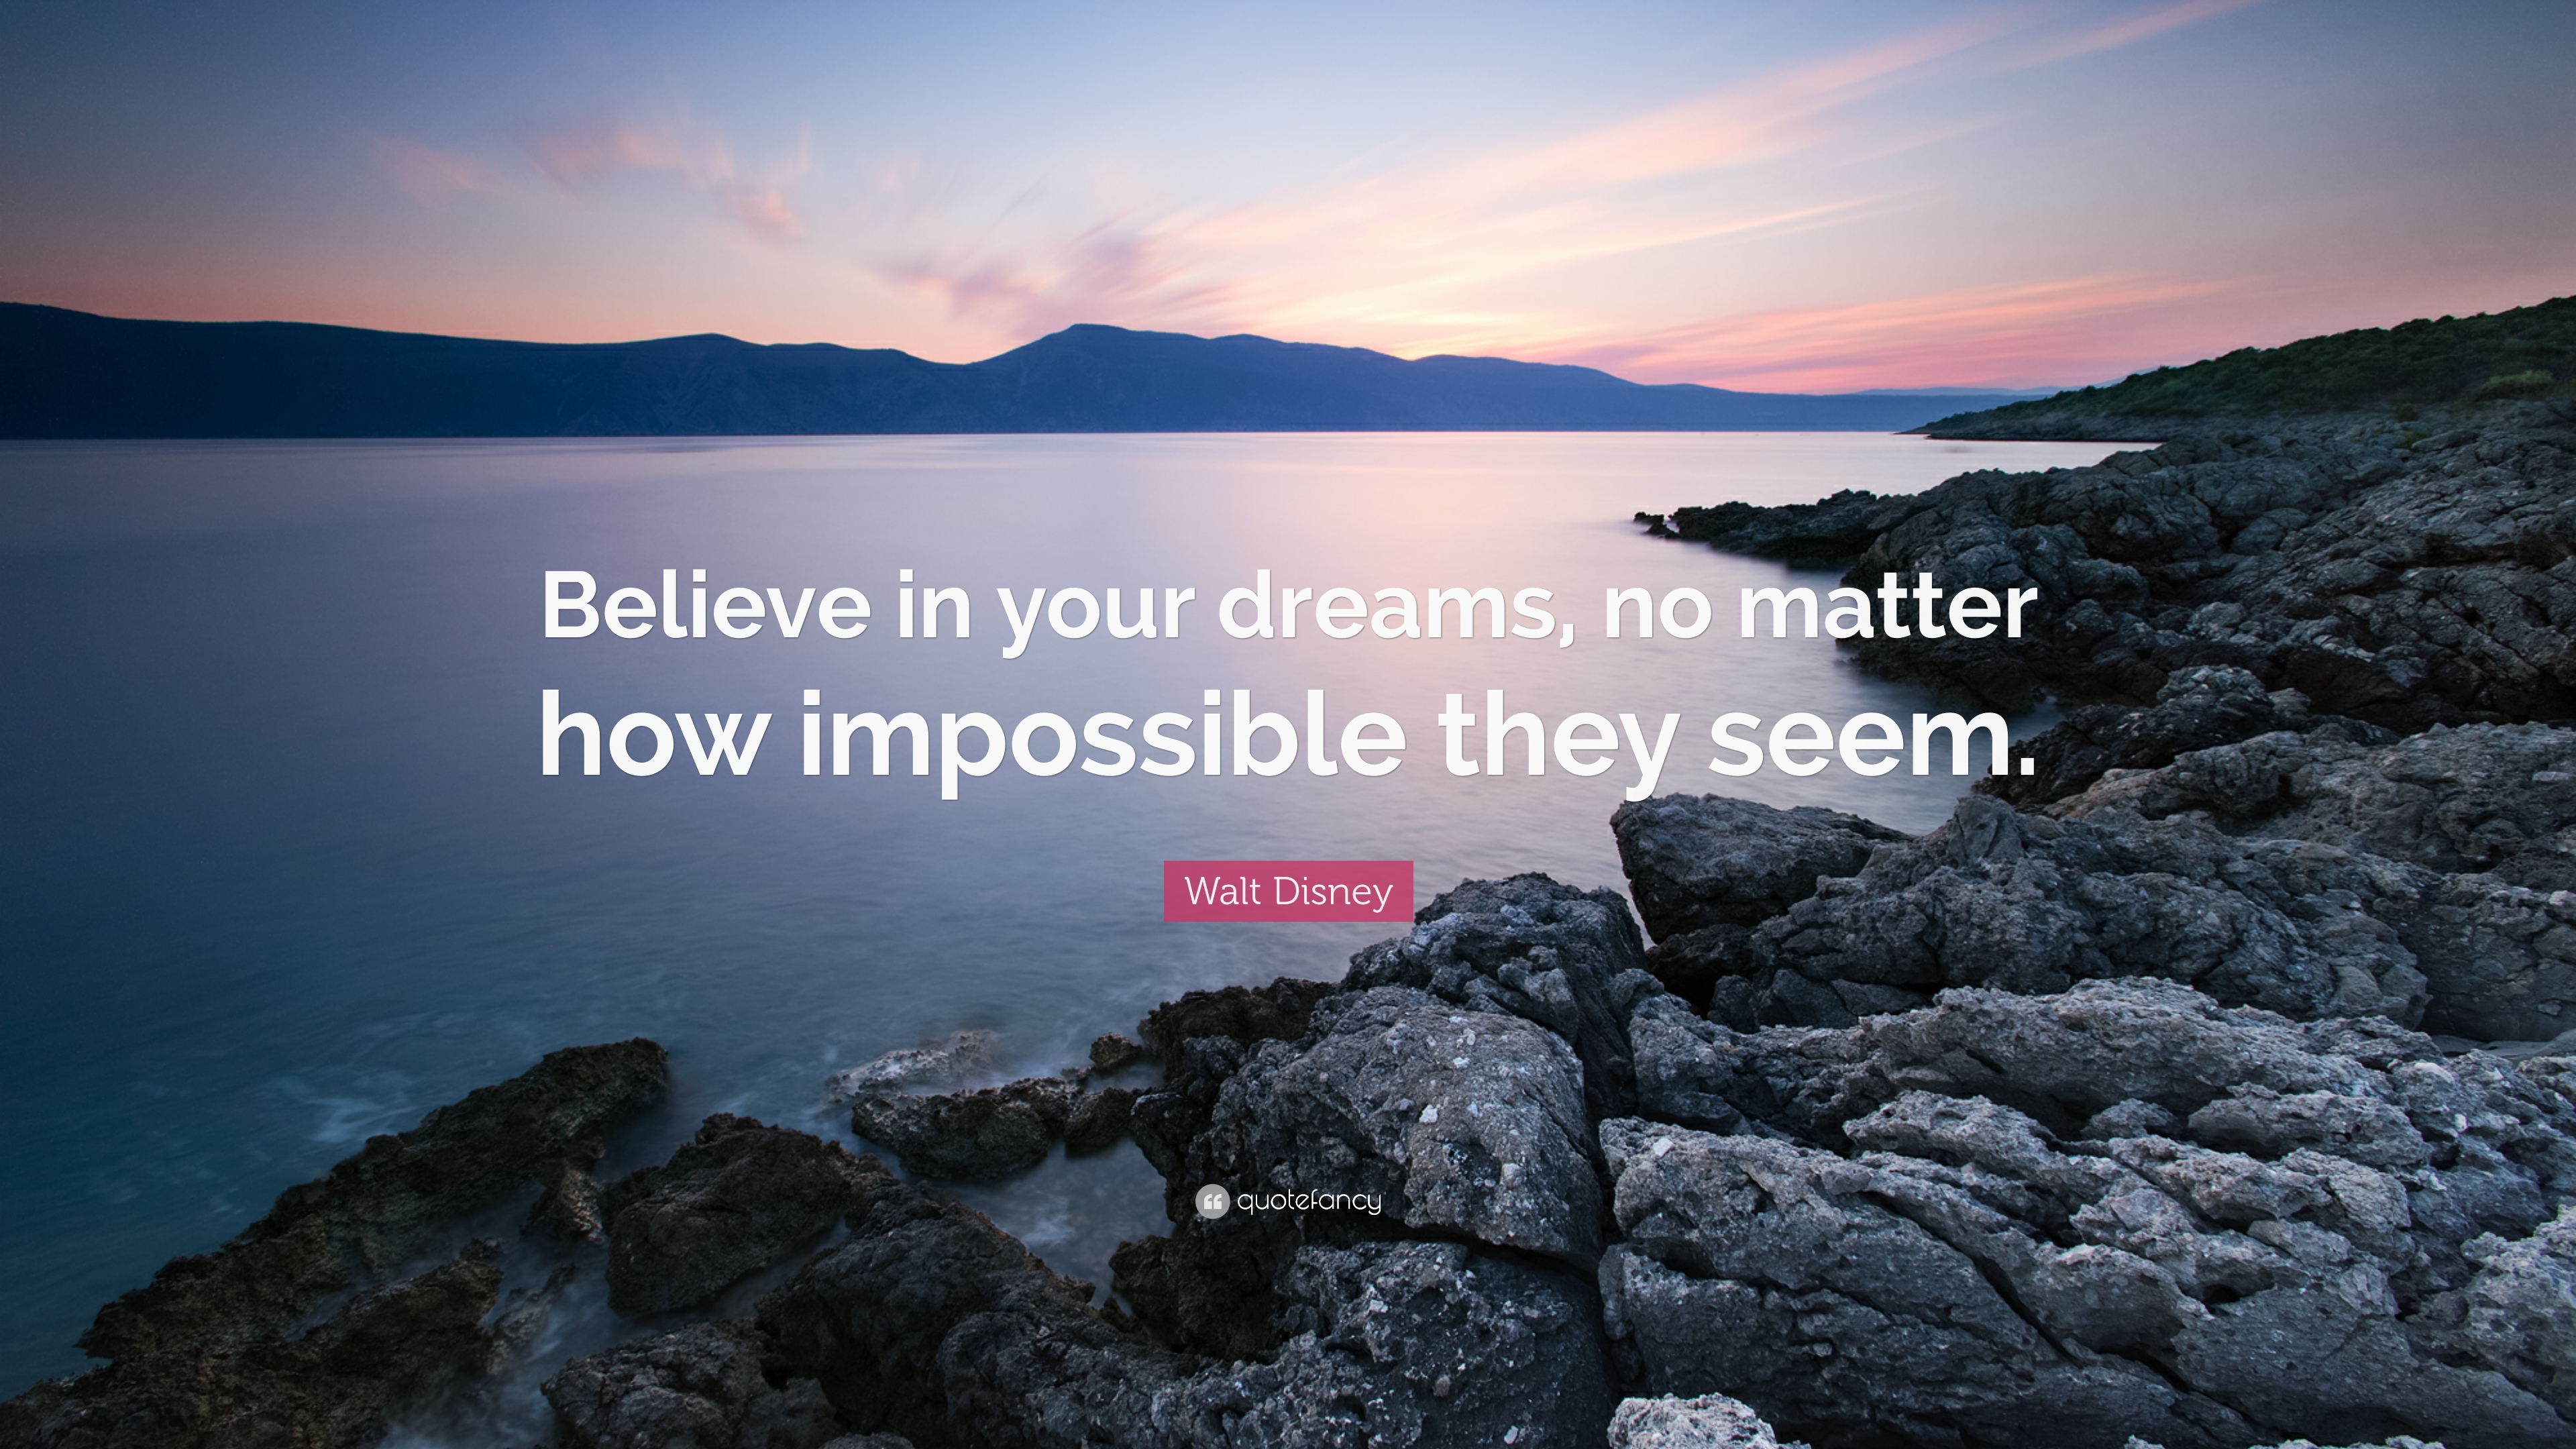 Walt Disney Quote: “Believe in your dreams, no matter how impossible